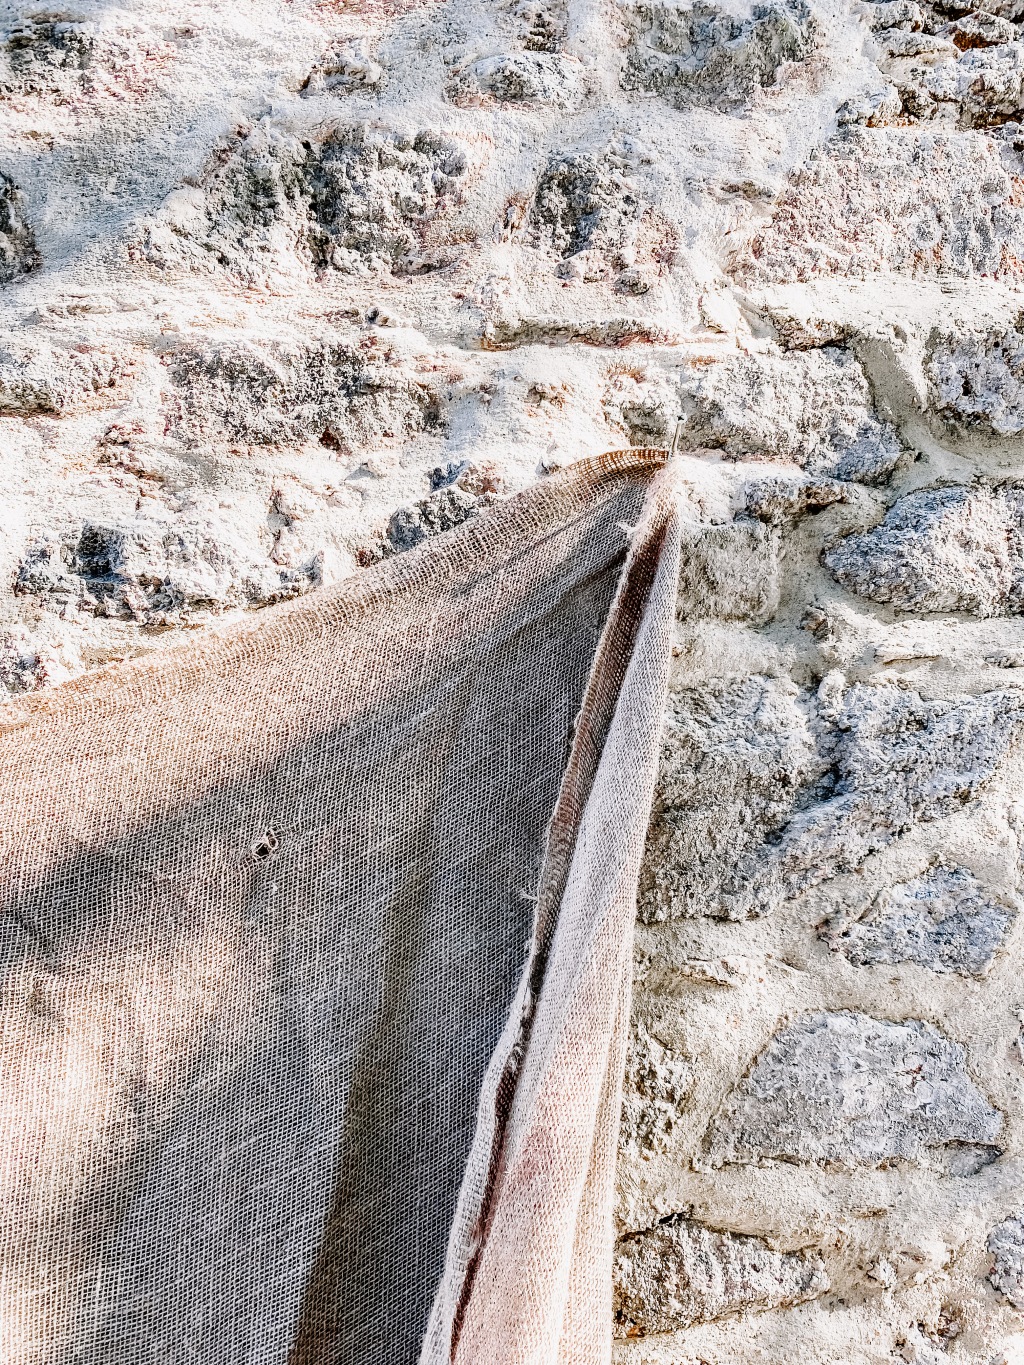 How To: DIY Repointing a Stone Wall